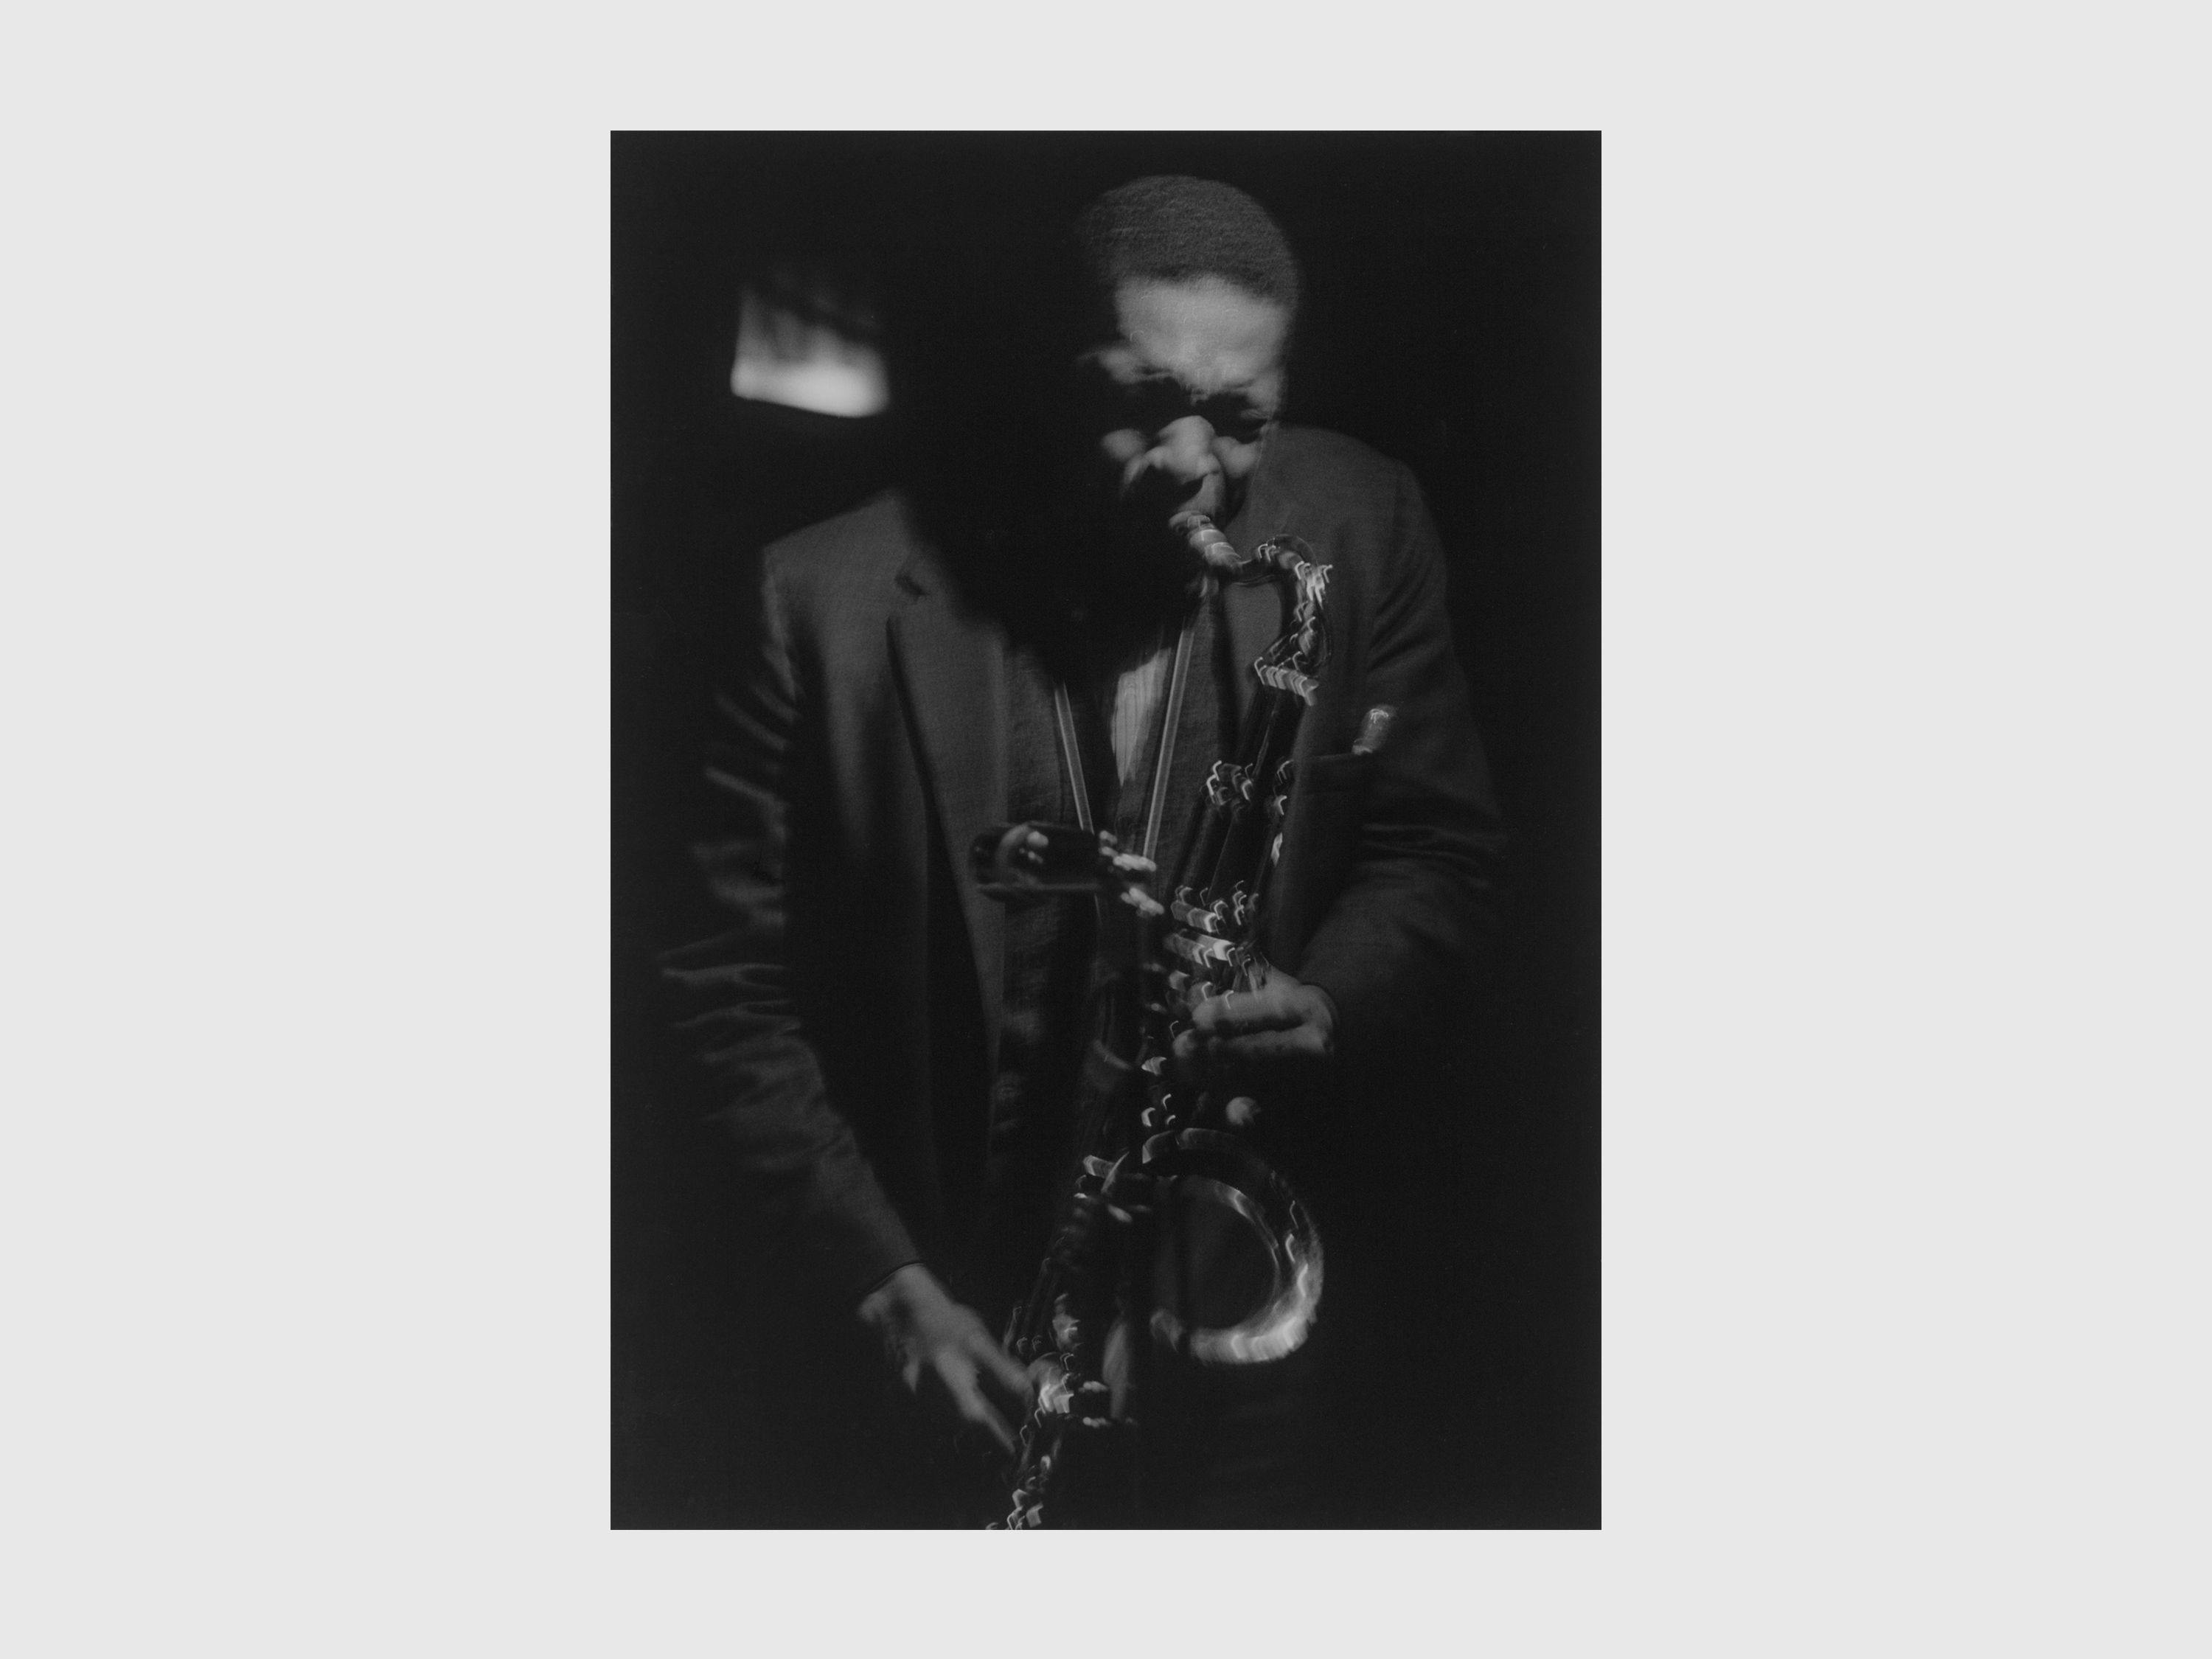 A photograph by Roy de Carava titled Coltrane #24, dated 1963.